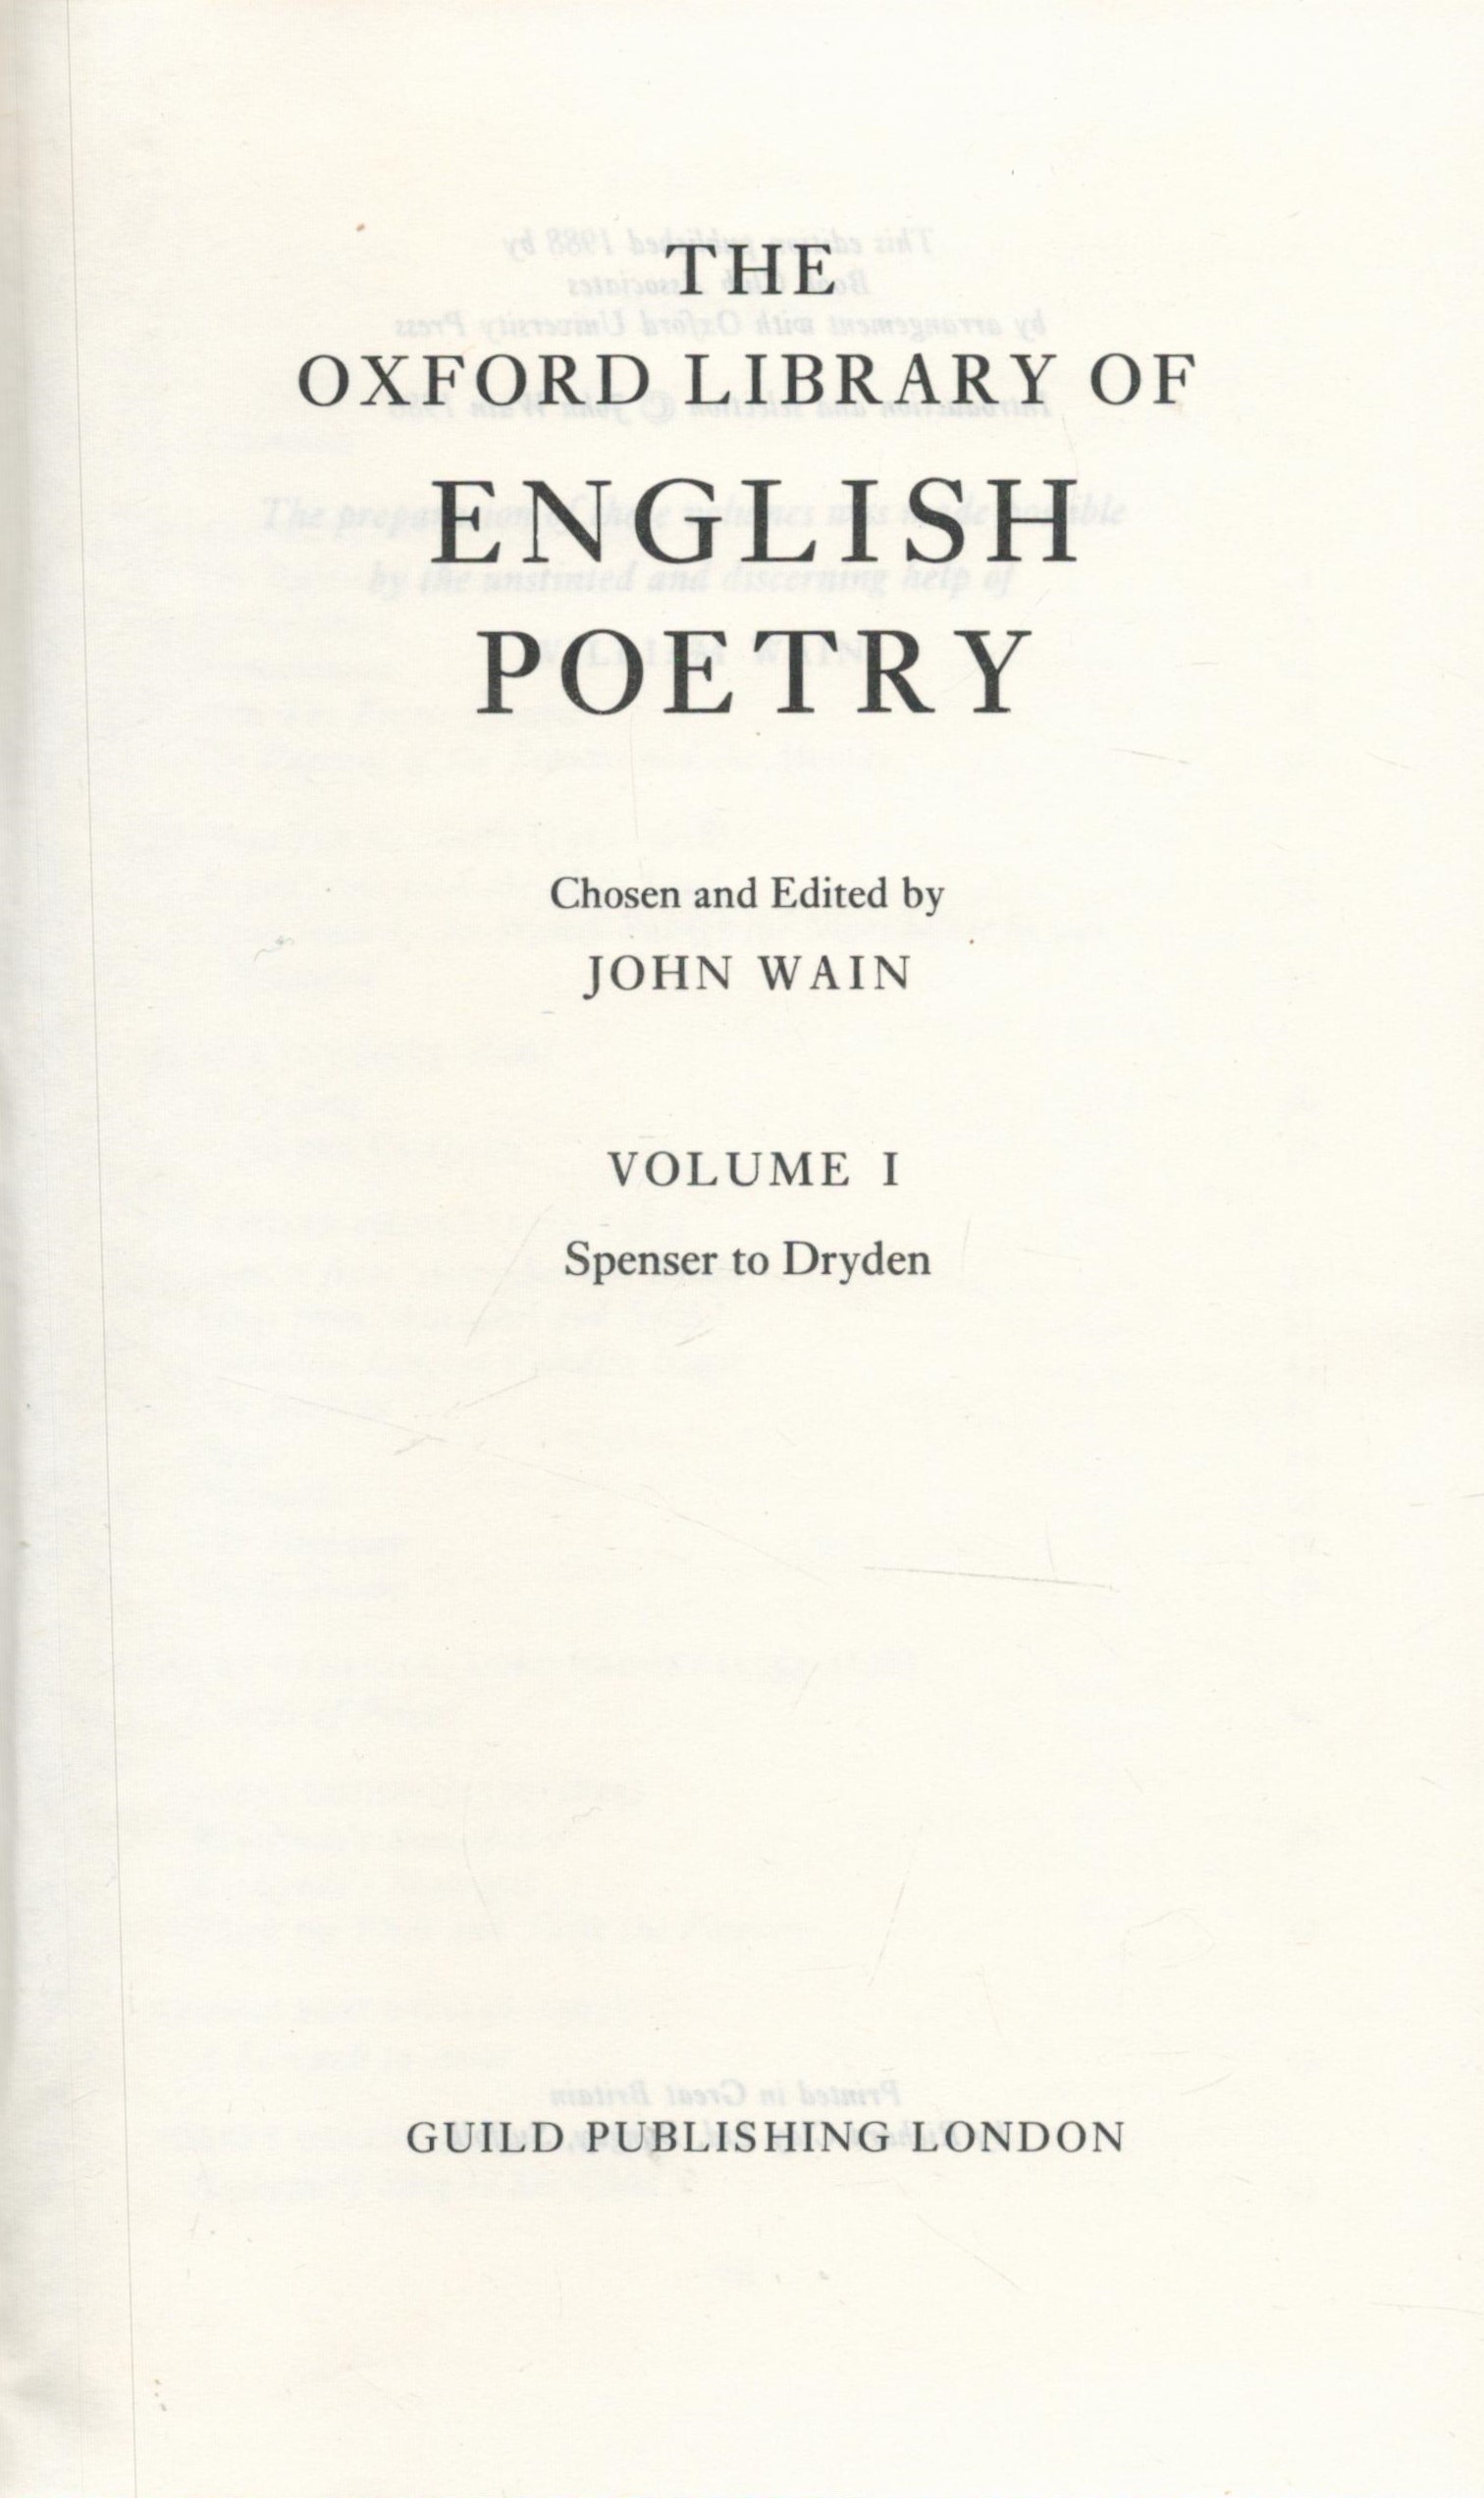 3 x Books The Oxford Library of English Poetry Edited by John Wain 1988 Book Club Edition Hardback - Image 3 of 4